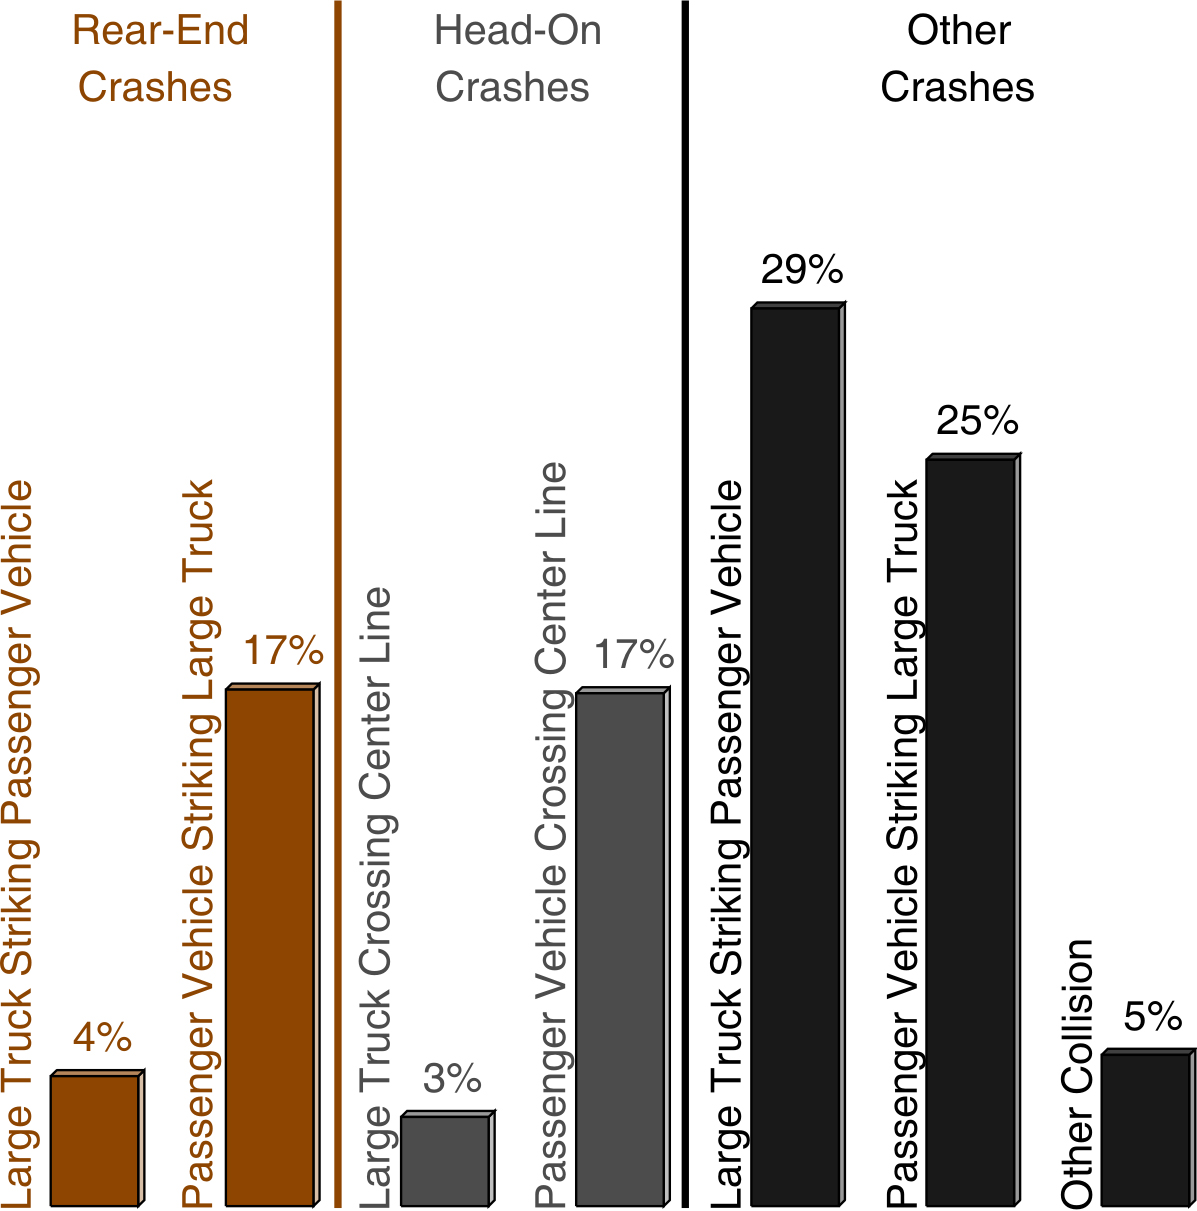 Bar Chart: Large trucks involved in fatal crashes with passenger vehicles by crash type, 2009. 
Data: 
Rear-End Crashes:
Large Truck Striking Passenger Vehicle, 4%; 
Passenger Vehicle Striking Large Truck, 17%. 
Head-On Crashes:
Large Truck Crossing Center Line, 3%; 
Passenger Vehicle Crossing Center Line, 17%. 
Other Crashes:
Large Truck Striking Passenger Vehicle, 29%; 
Passenger Vehicle Striking Large Truck, 25%; 
Other Collision, 5%.